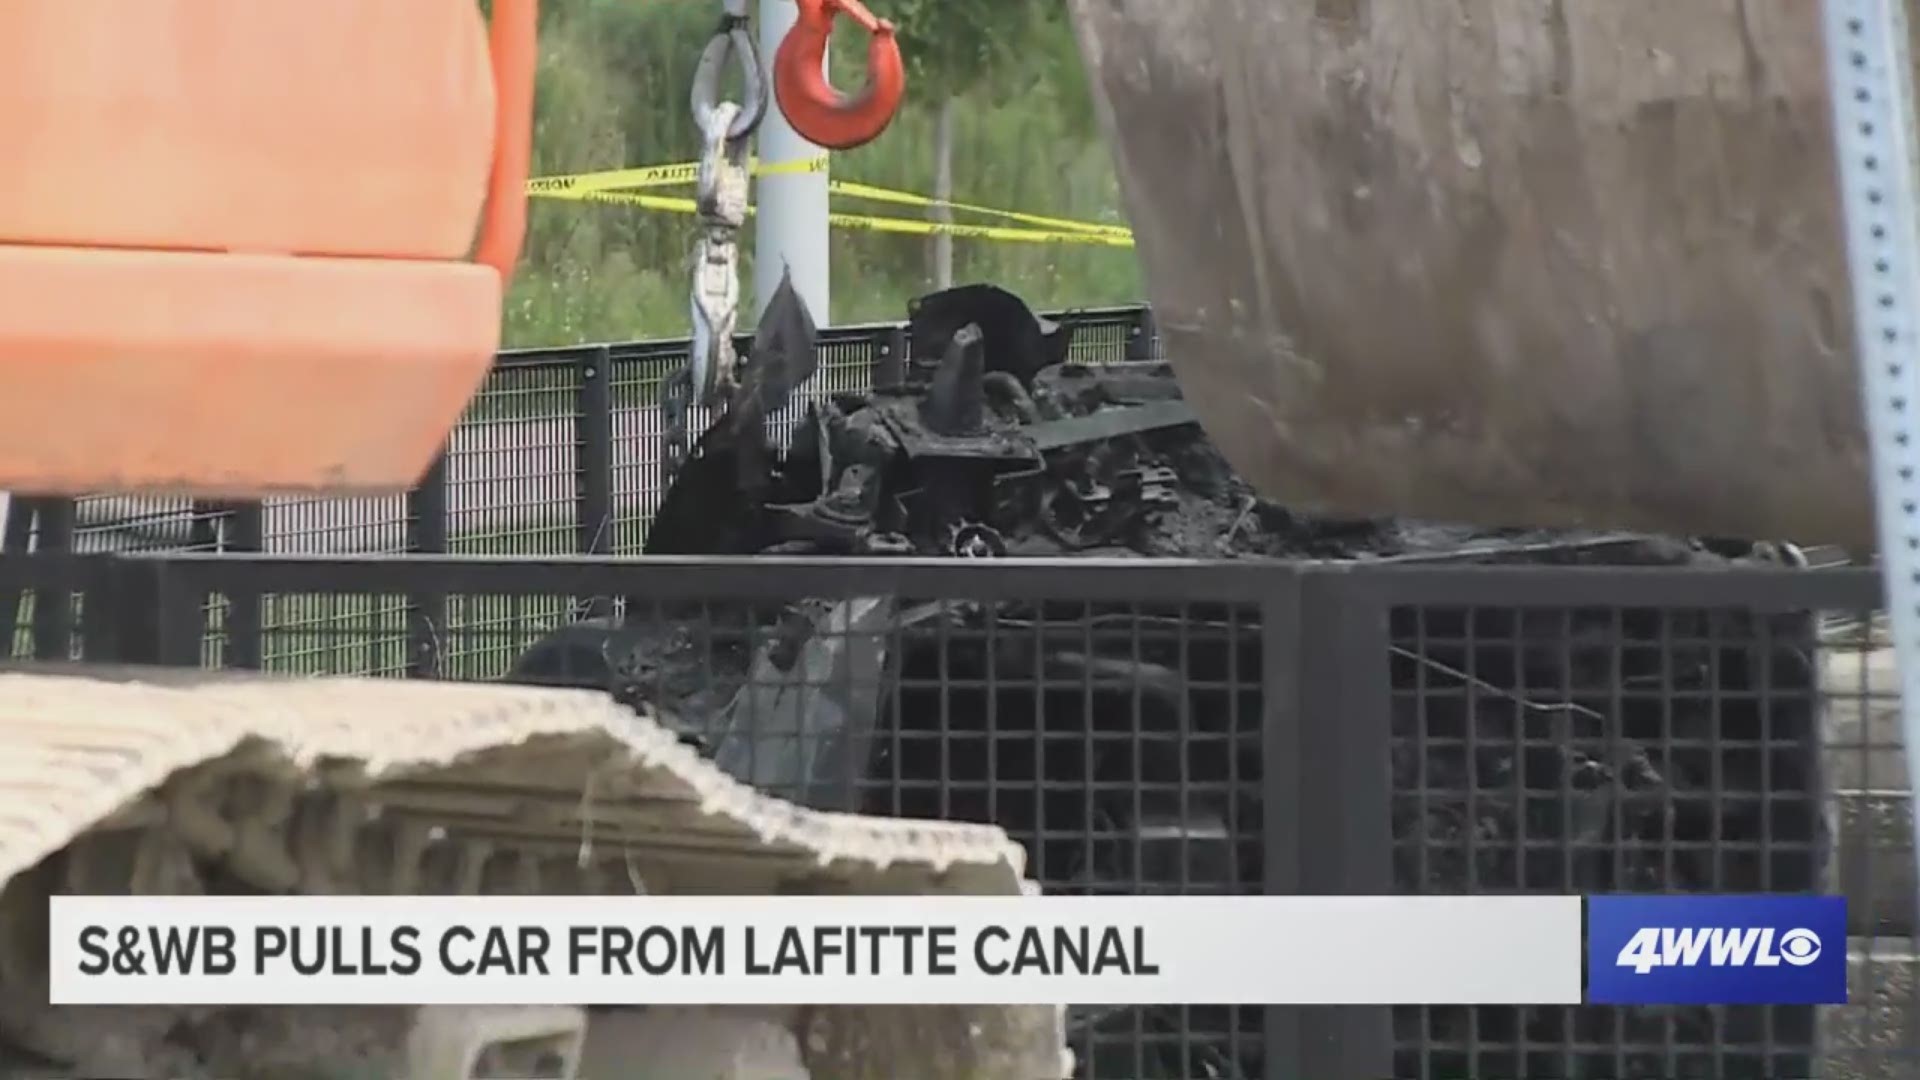 A Mazda 626 was pulled from an underground canal in New Orleans Thursday after several hours of work. The car was discovered along with other debris after an amphibious vehicle inspected the canal following overtopping of the canal during a July 10 rain event.